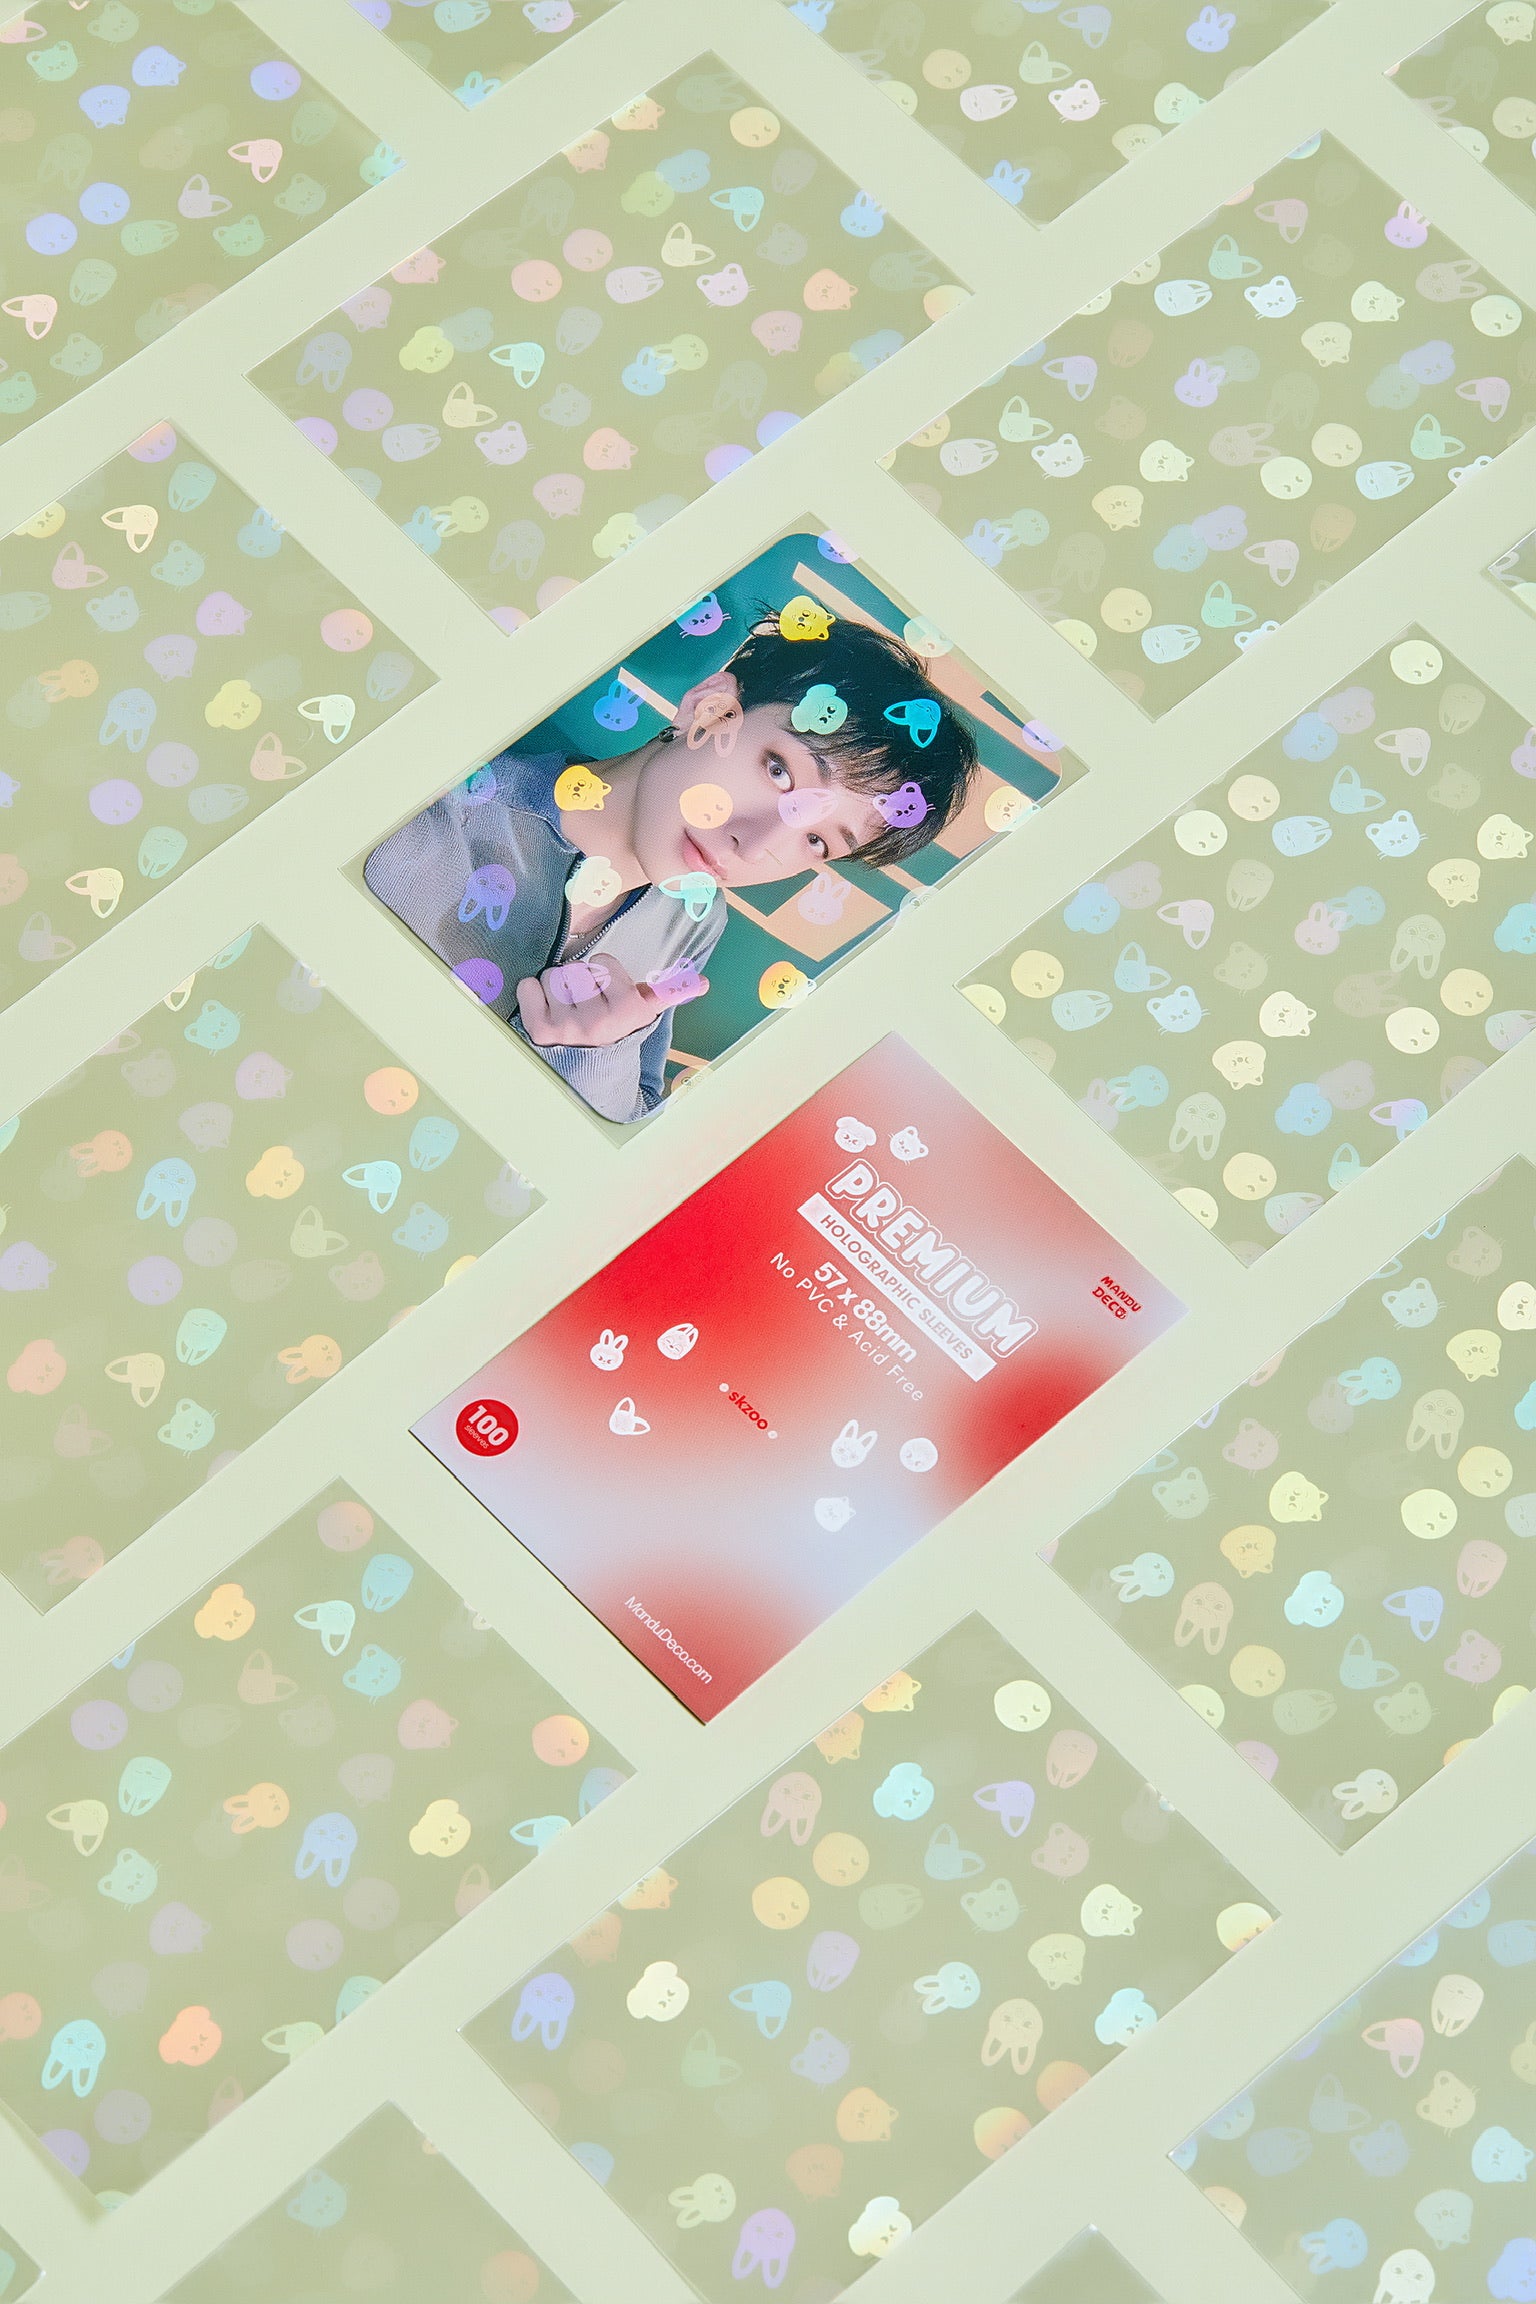 PREMIUM HOLOGRAPHIC PHOTOCARD SLEEVES - SKZOO VERSION